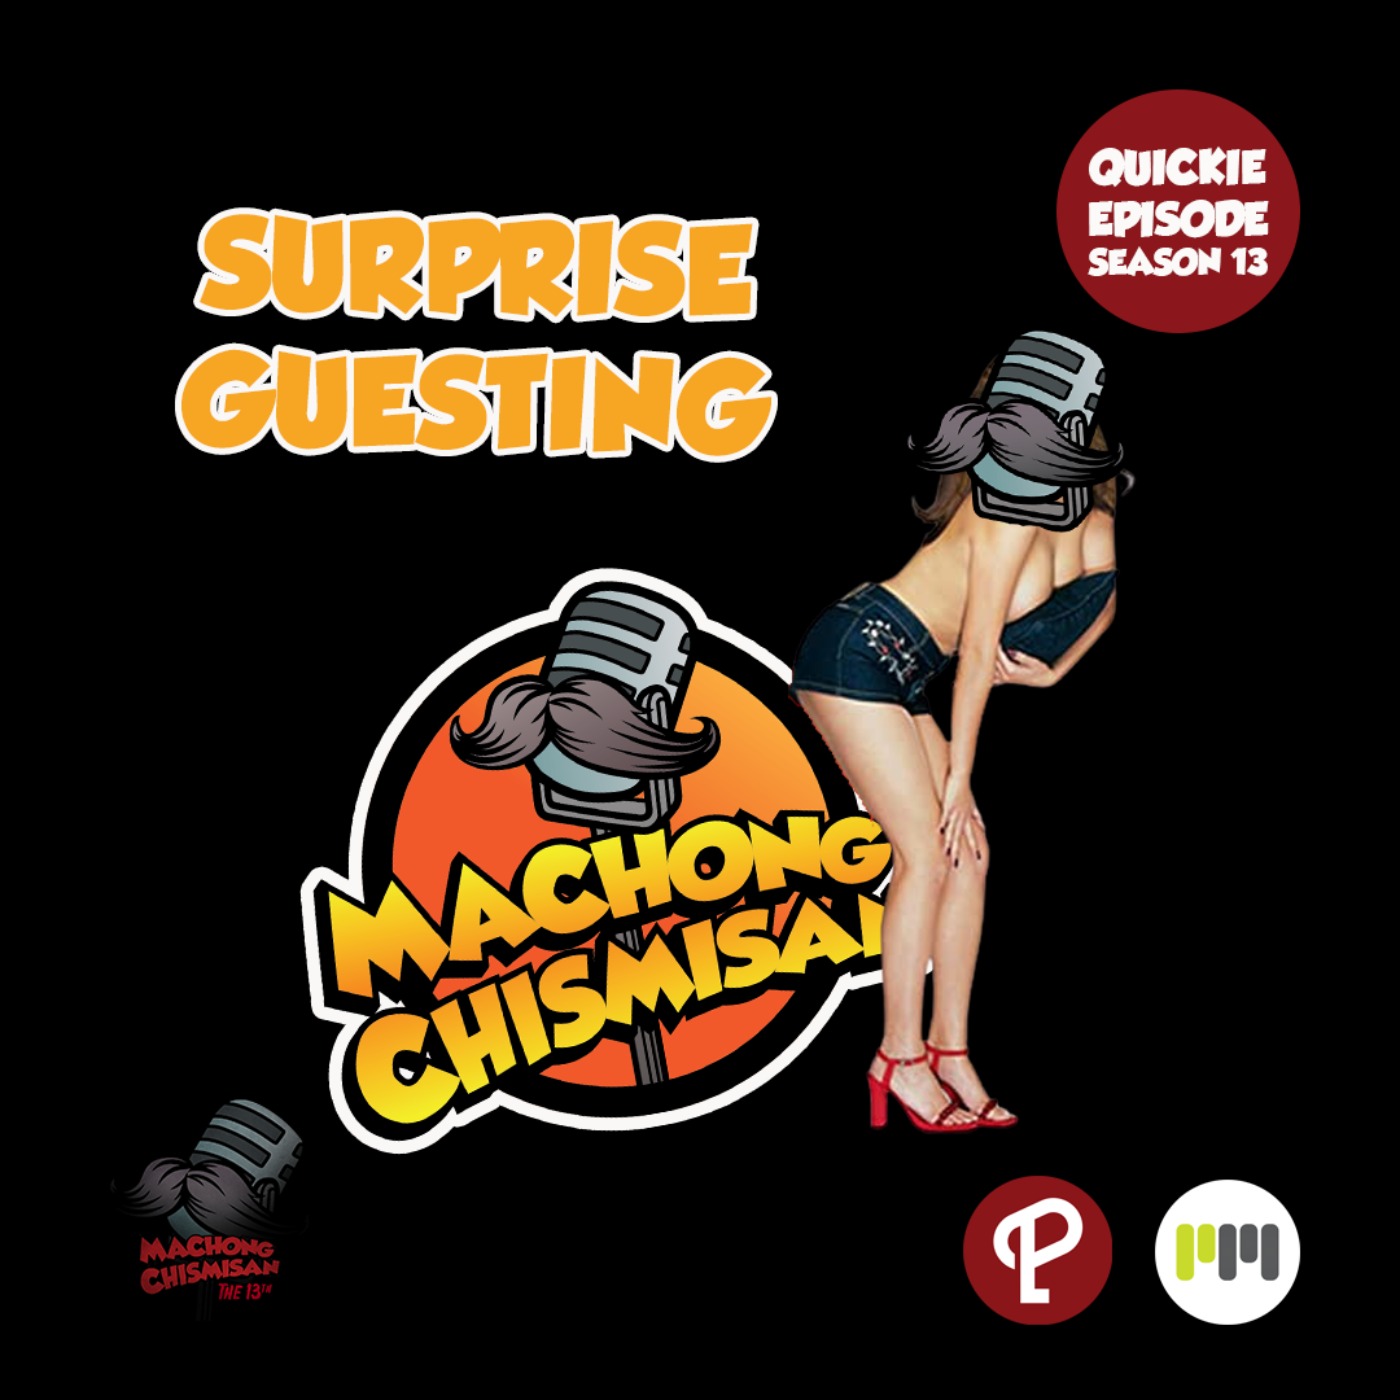 cover art for Machong Chismisan S13QuickieEpisode: Surprise Guesting